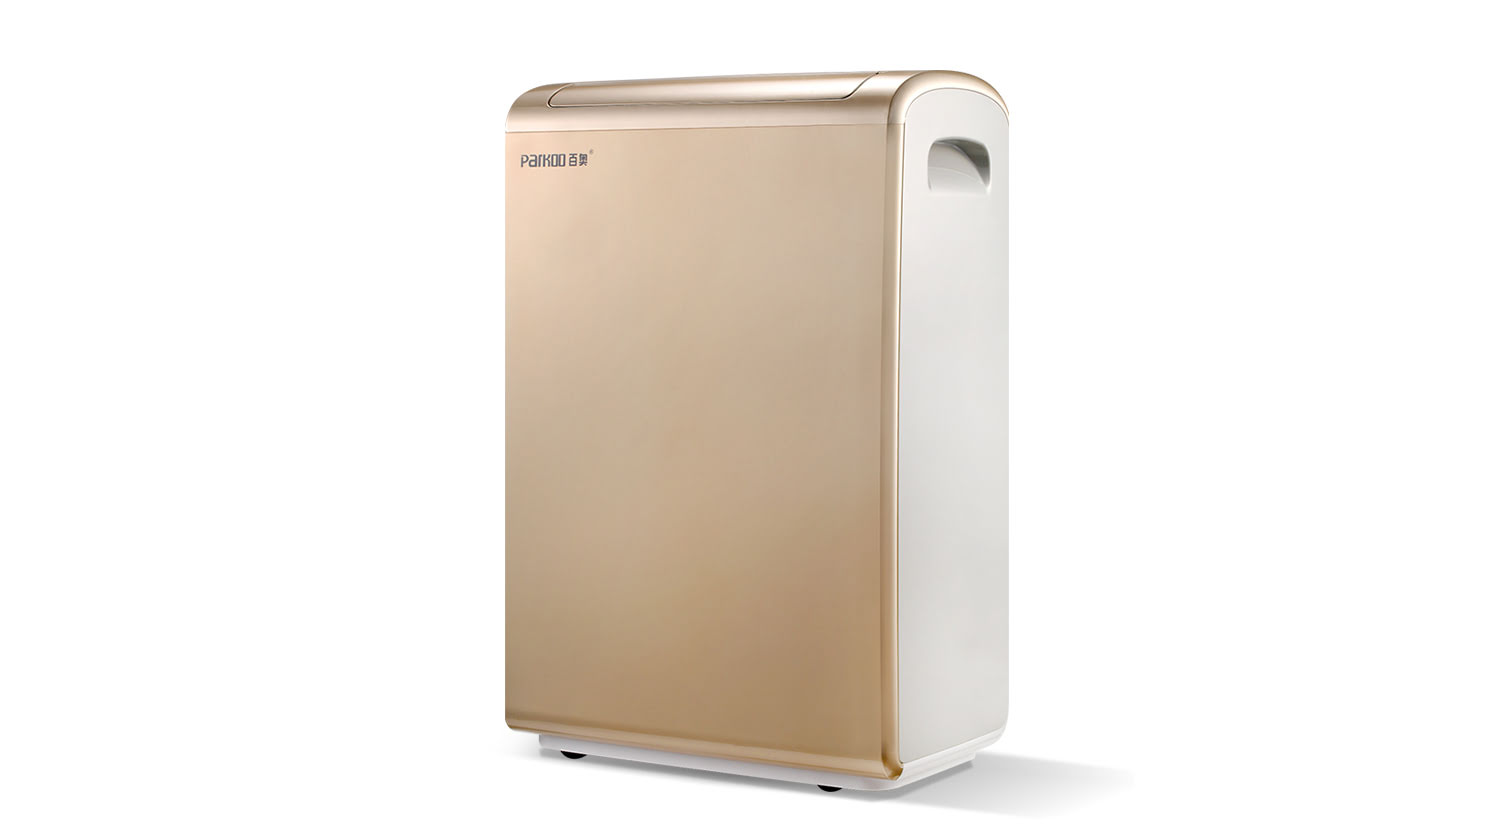 Does the dehumidifier work well- Look at the user's comments